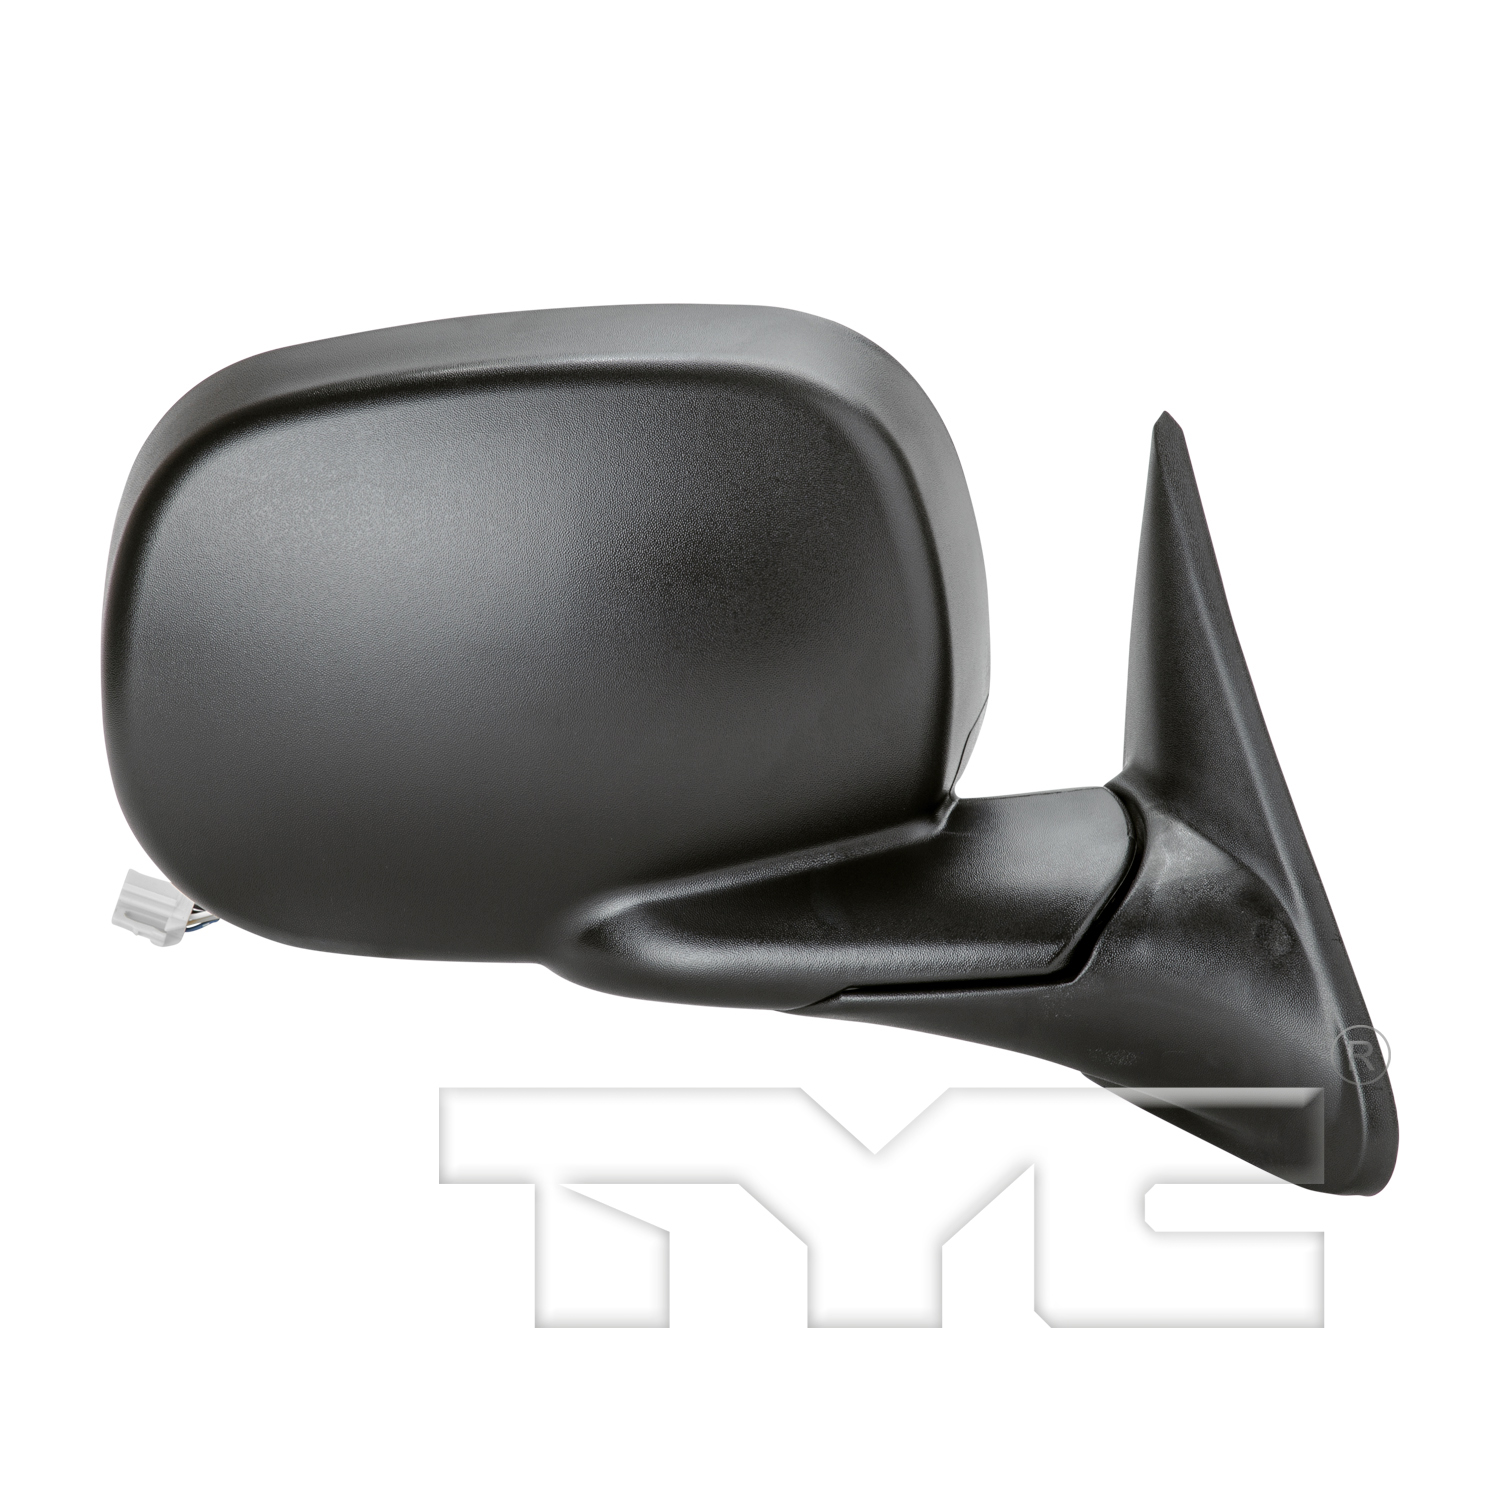 Aftermarket MIRRORS for DODGE - RAM 1500, RAM 1500,98-01,RT Mirror outside rear view